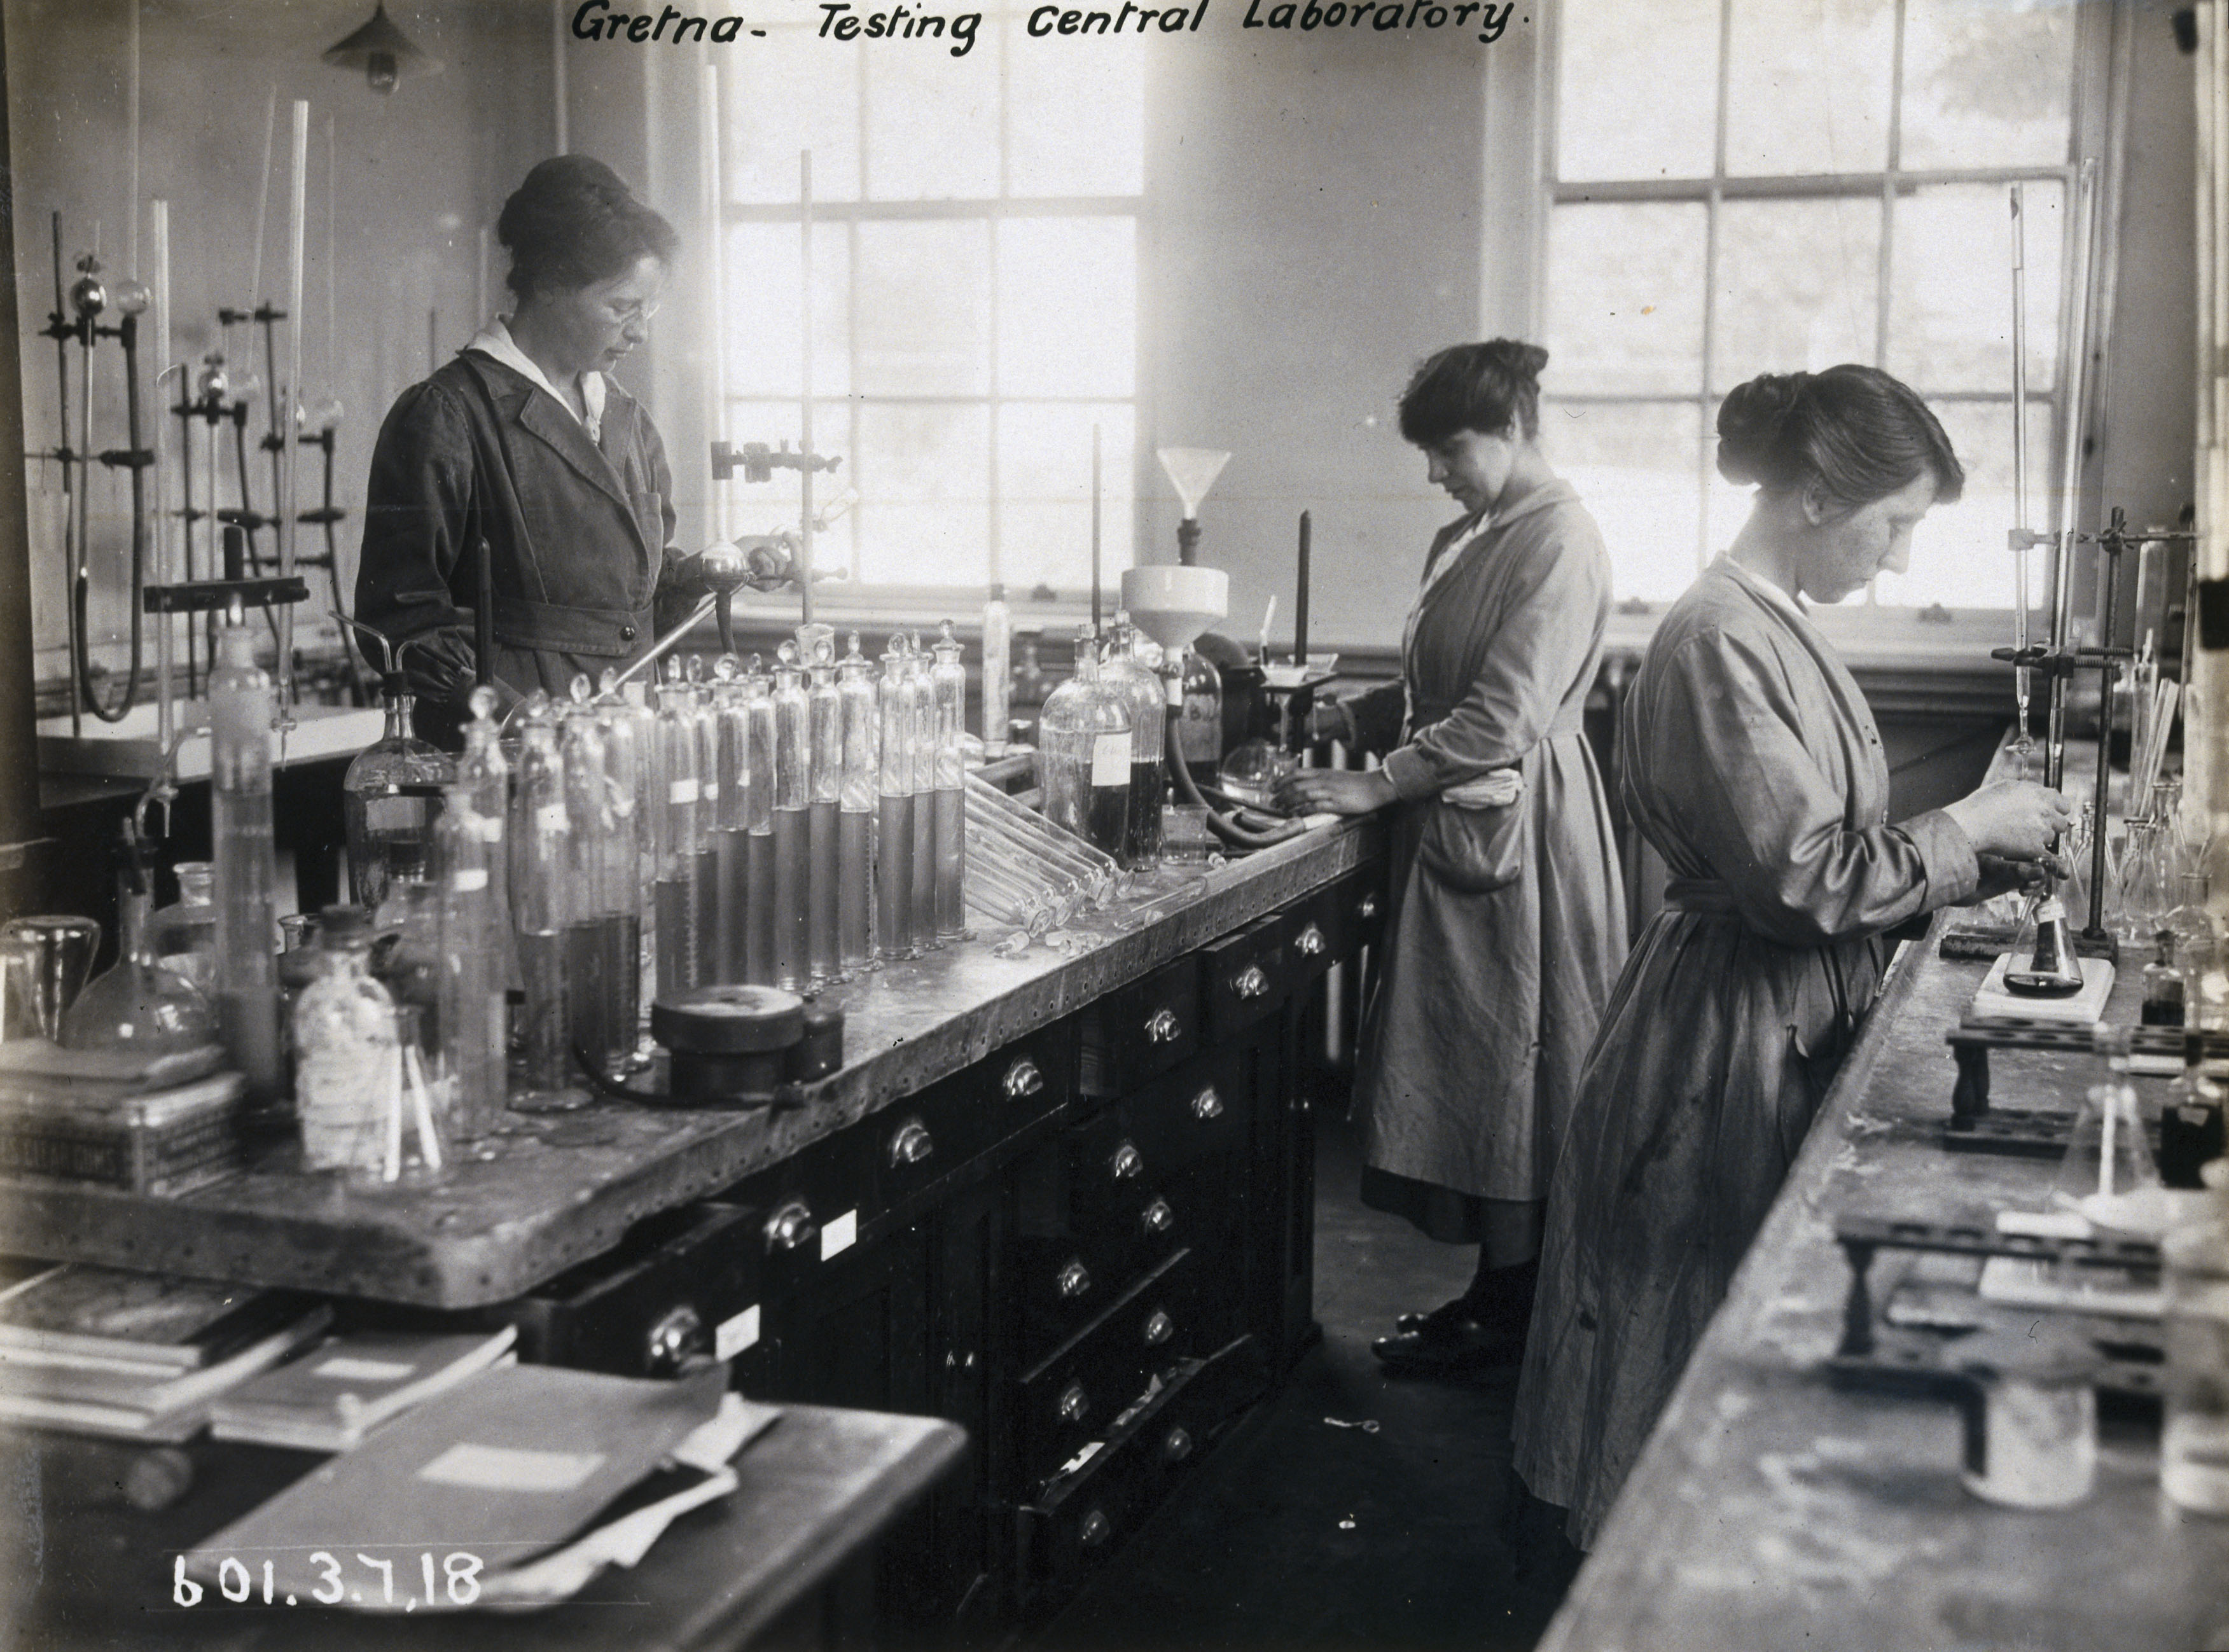 1918:  Women workers testing in the central laboratory in a huge cordite explosive factory built at Gretna in 1915, providing employment for over 9,000 women during World War I.  (Photo by SSPL/Getty Images)